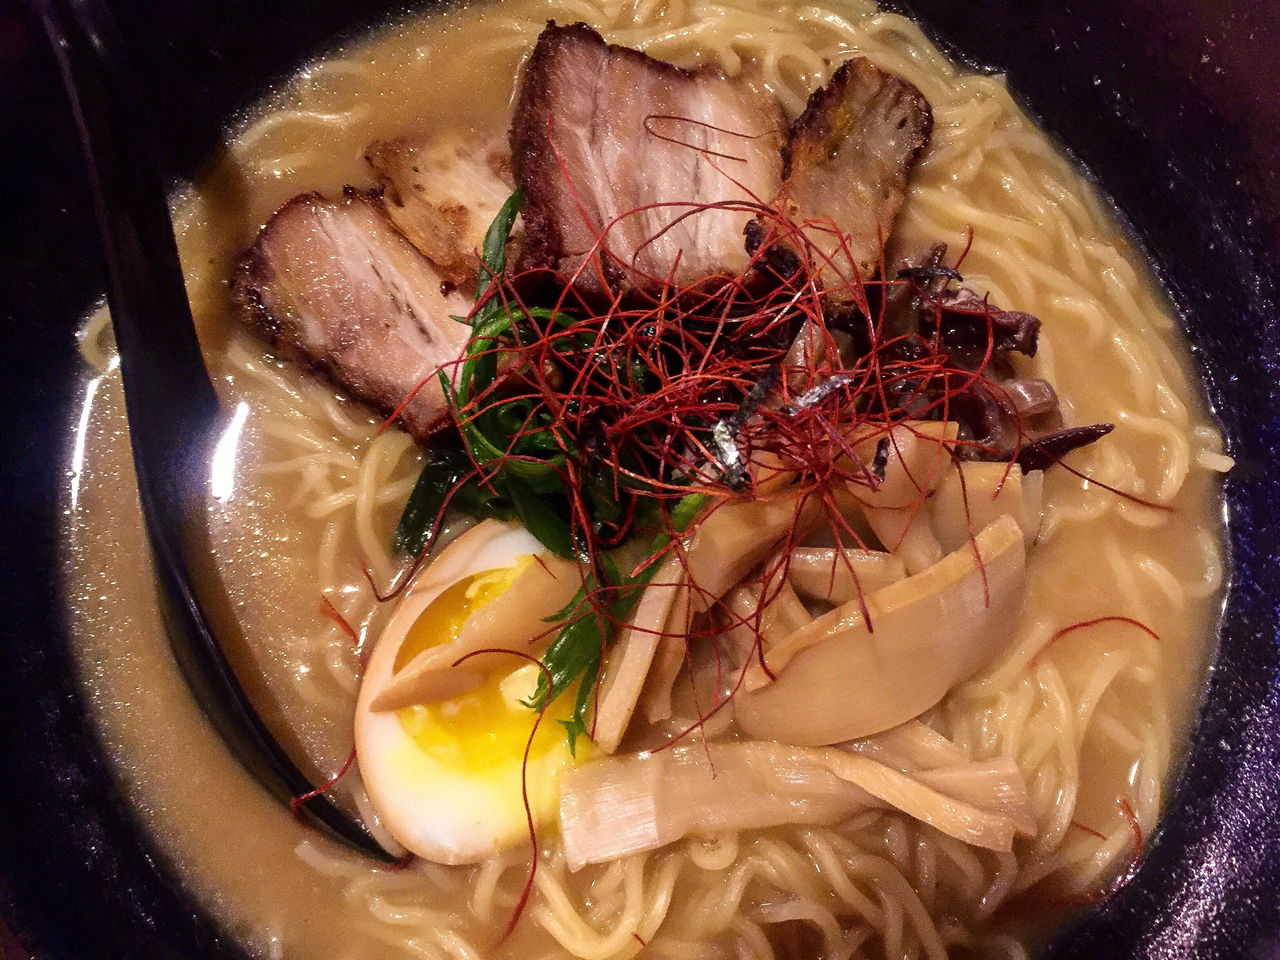 Noodles and pork are among the wonders in a bowl of spicy ramen at J Ramen & Sushi.